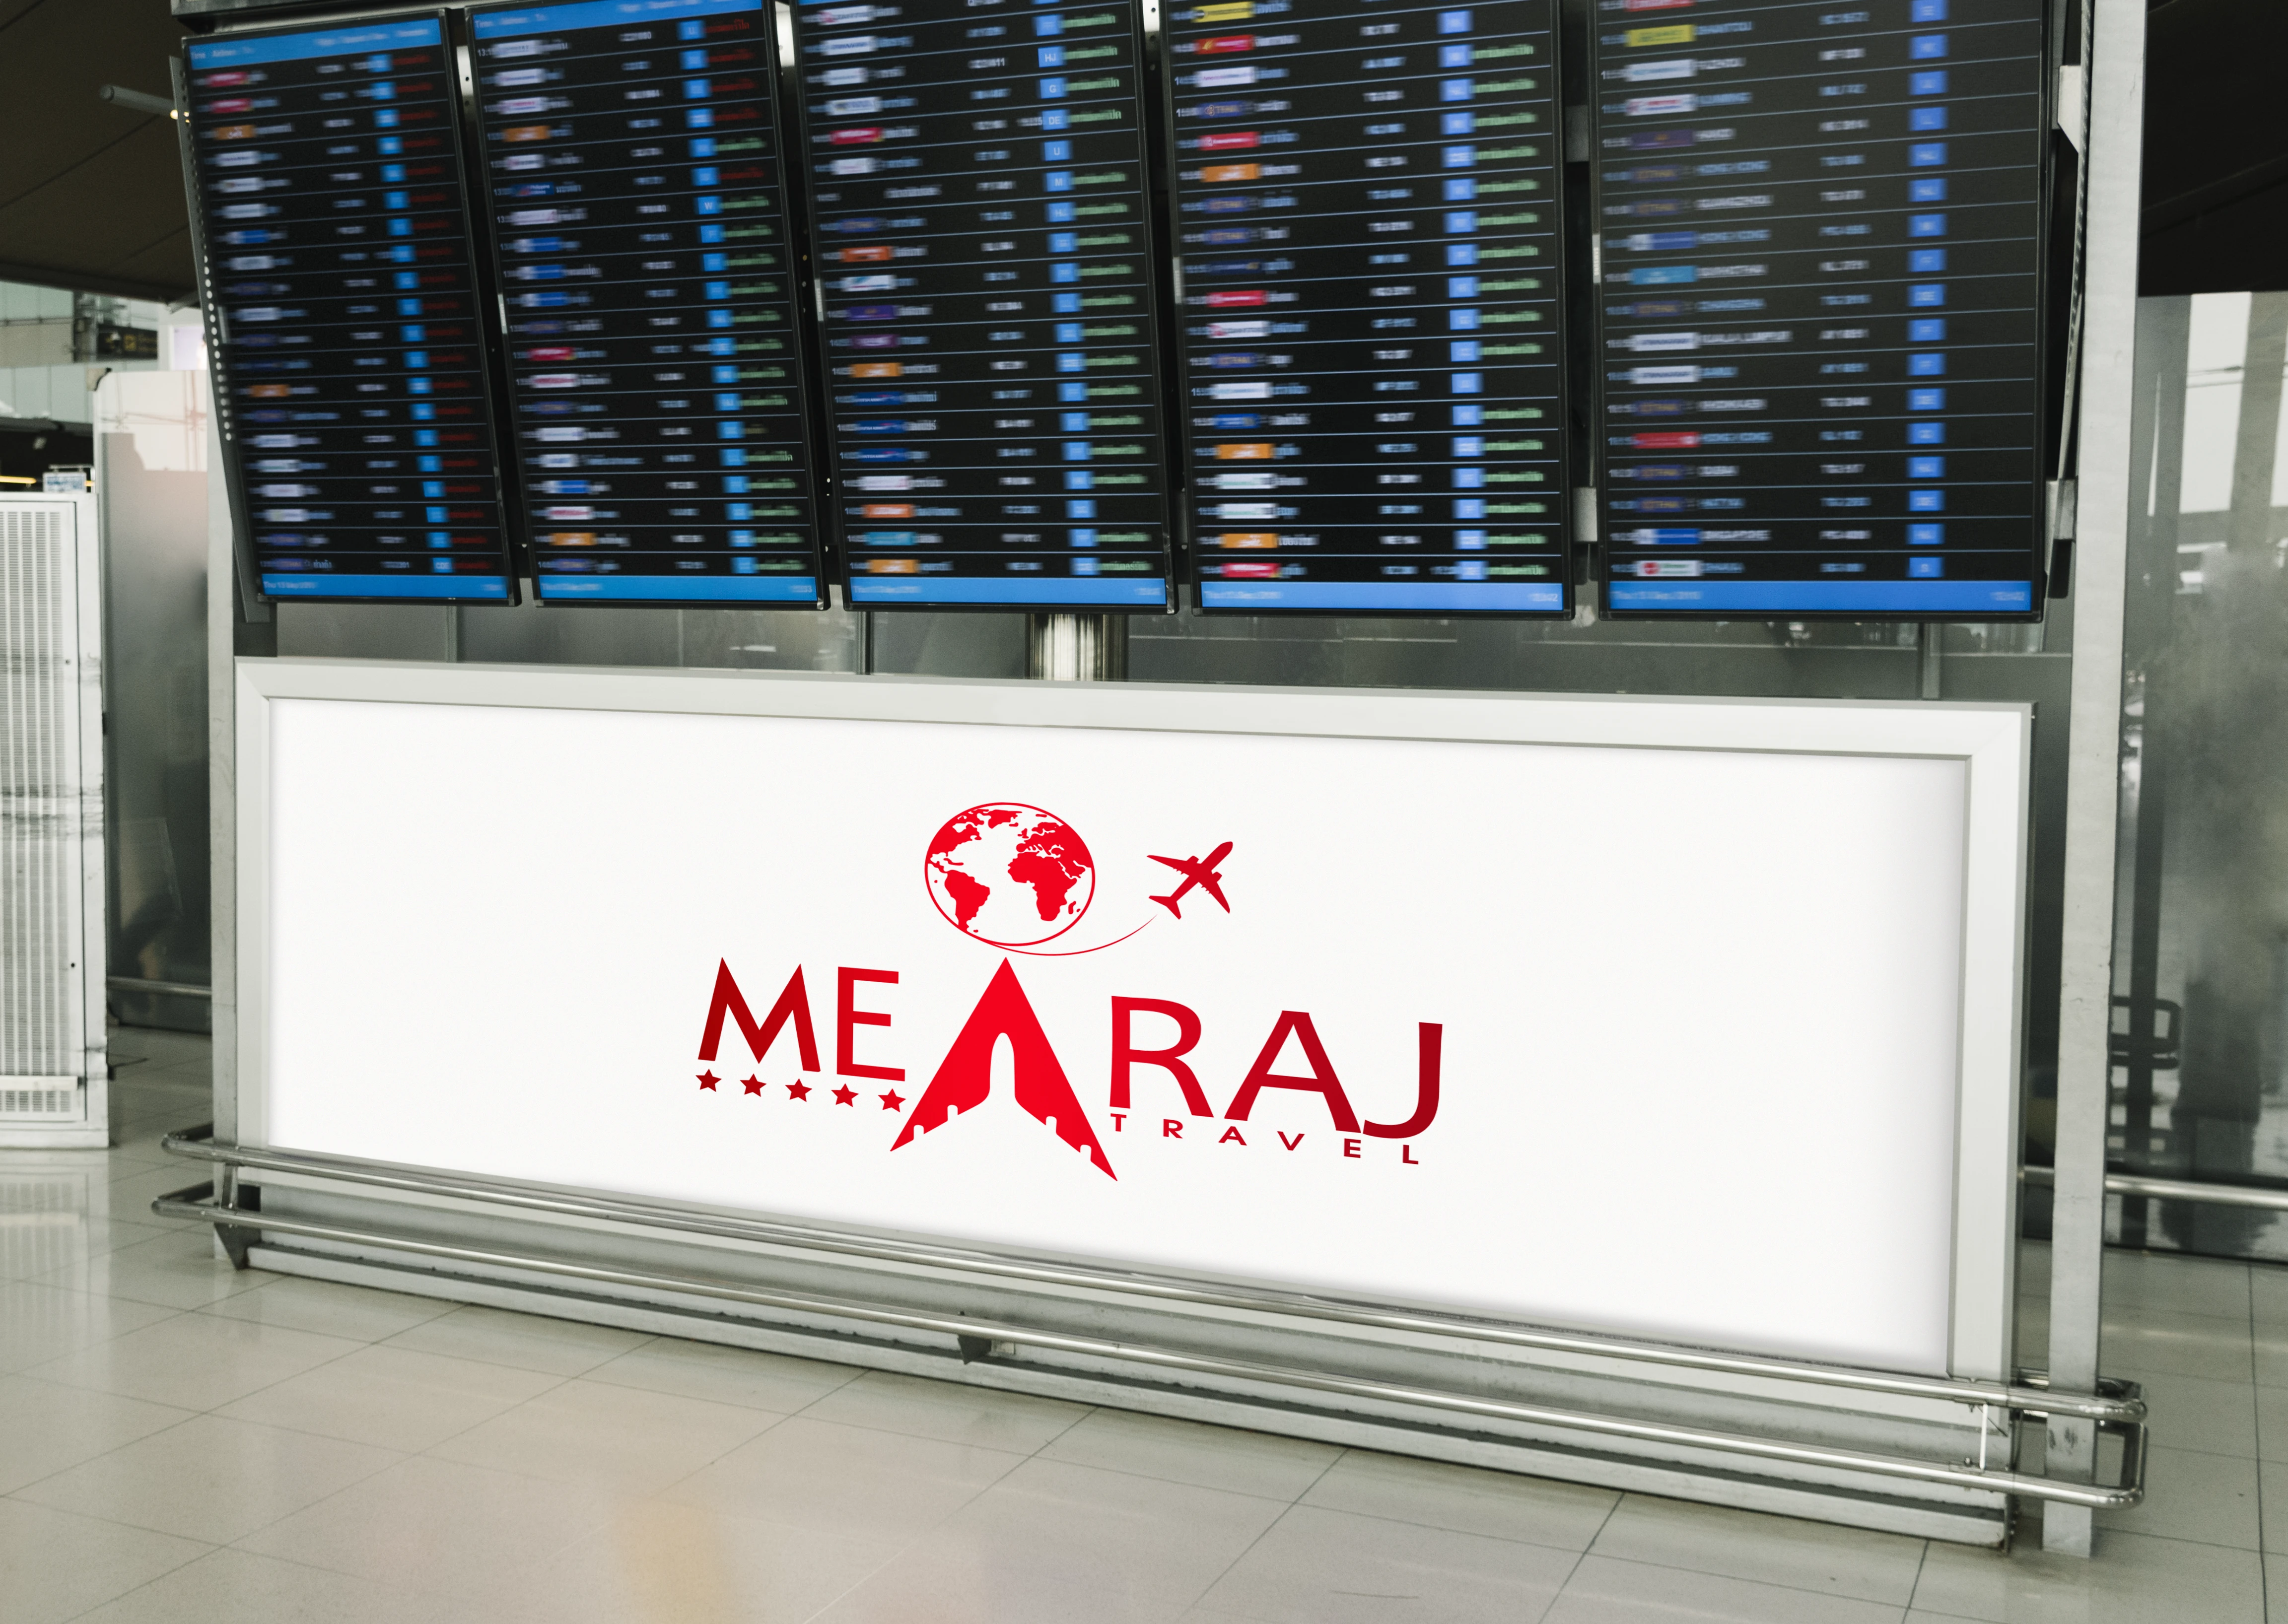 About Mearaj Travel